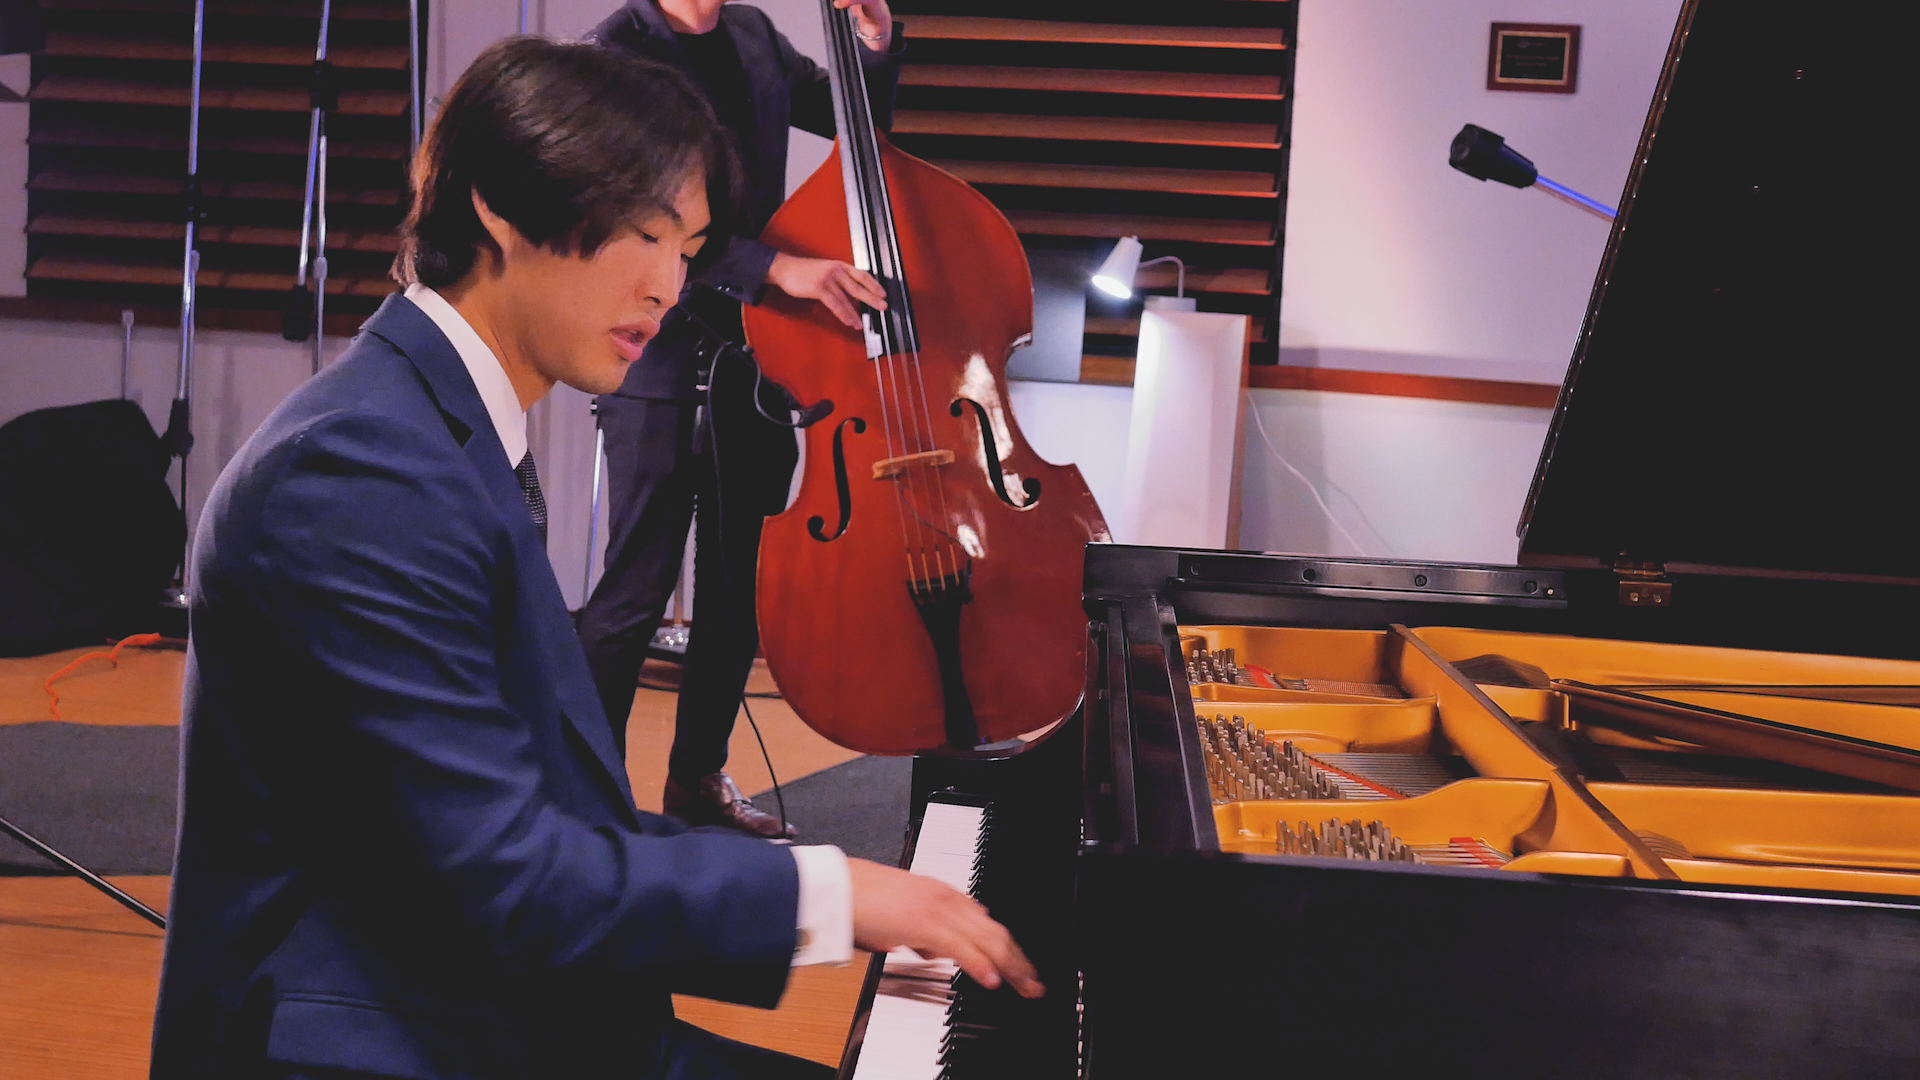 A man in a suit is playing a piano while another man plays a double bass.